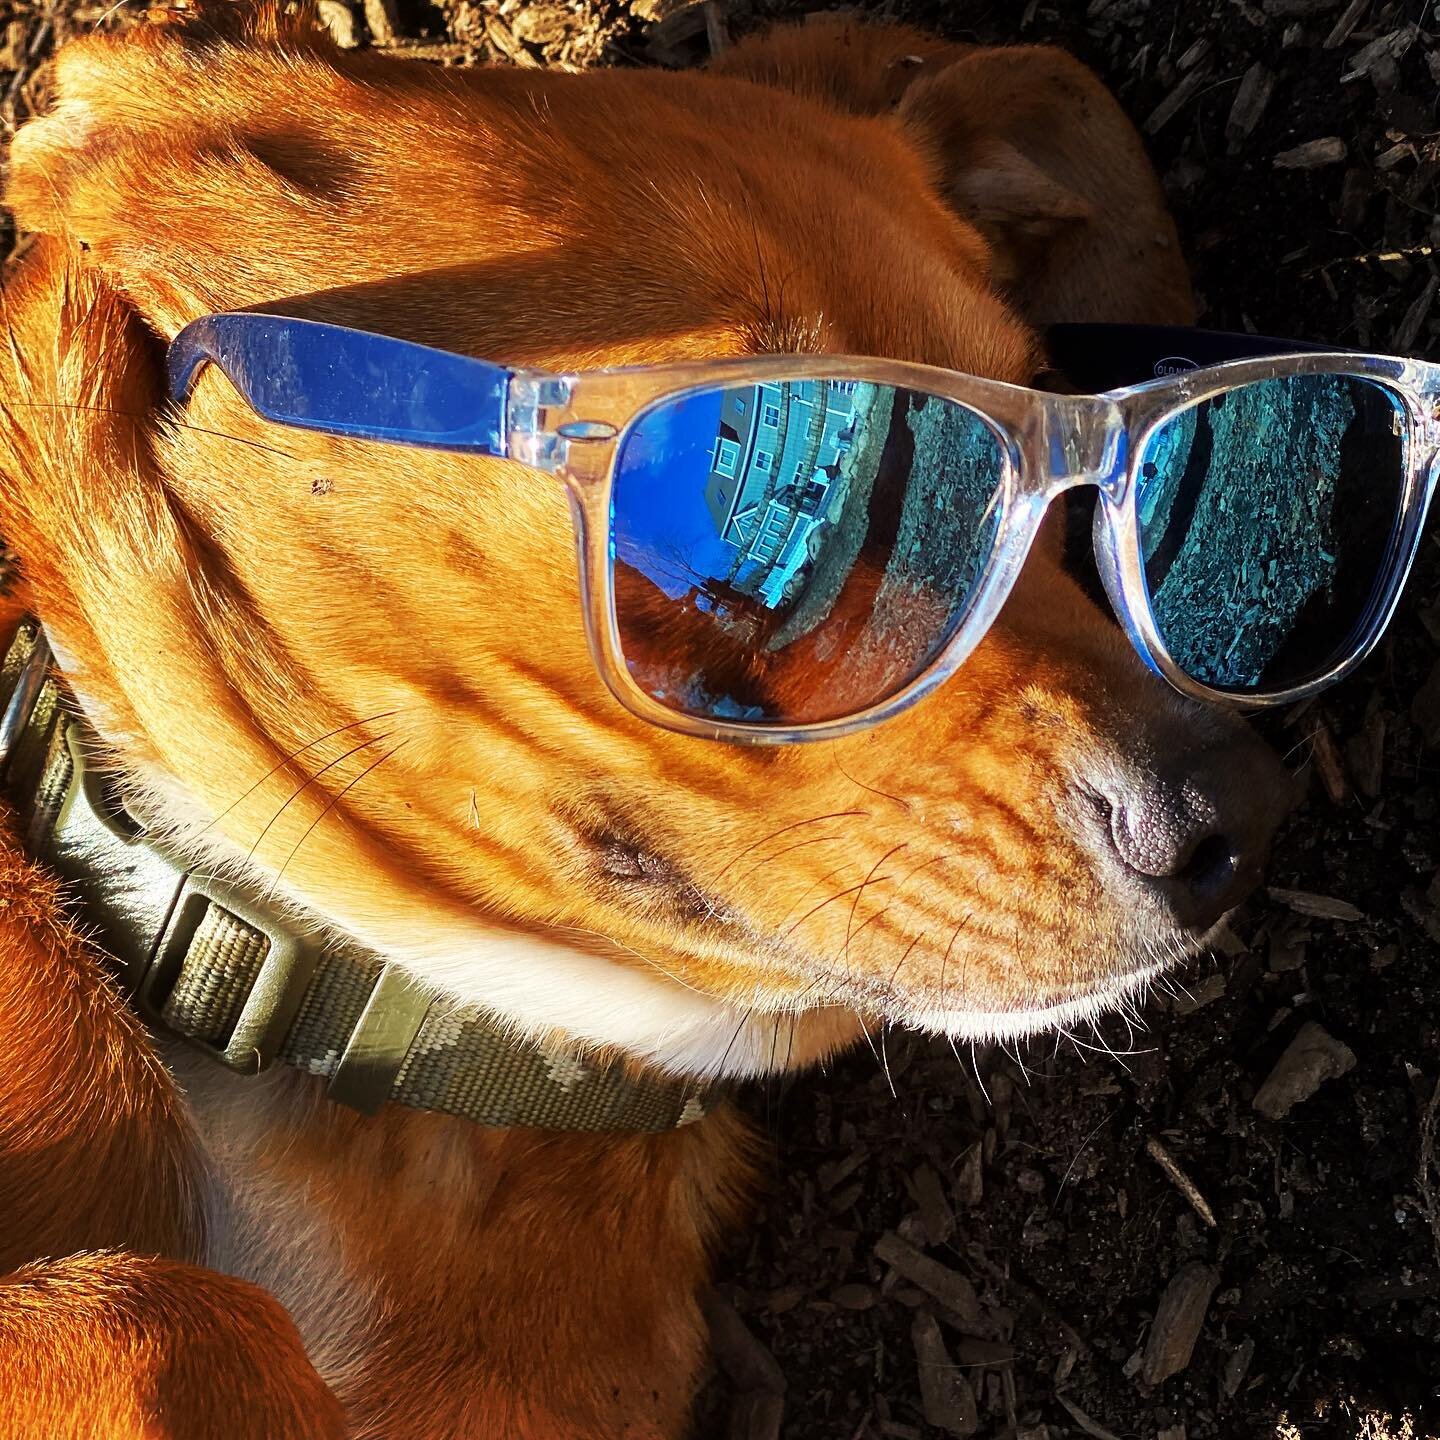 Baron was Our Pack&rsquo;s &ldquo;Stud of the Day&rdquo; 🕶 🐾🐾
-
-
More pics on Facebook!
-
-
#studmackenzie #toocool #sunglassesstyle #friendshipgoals #camplifehappylife🐾